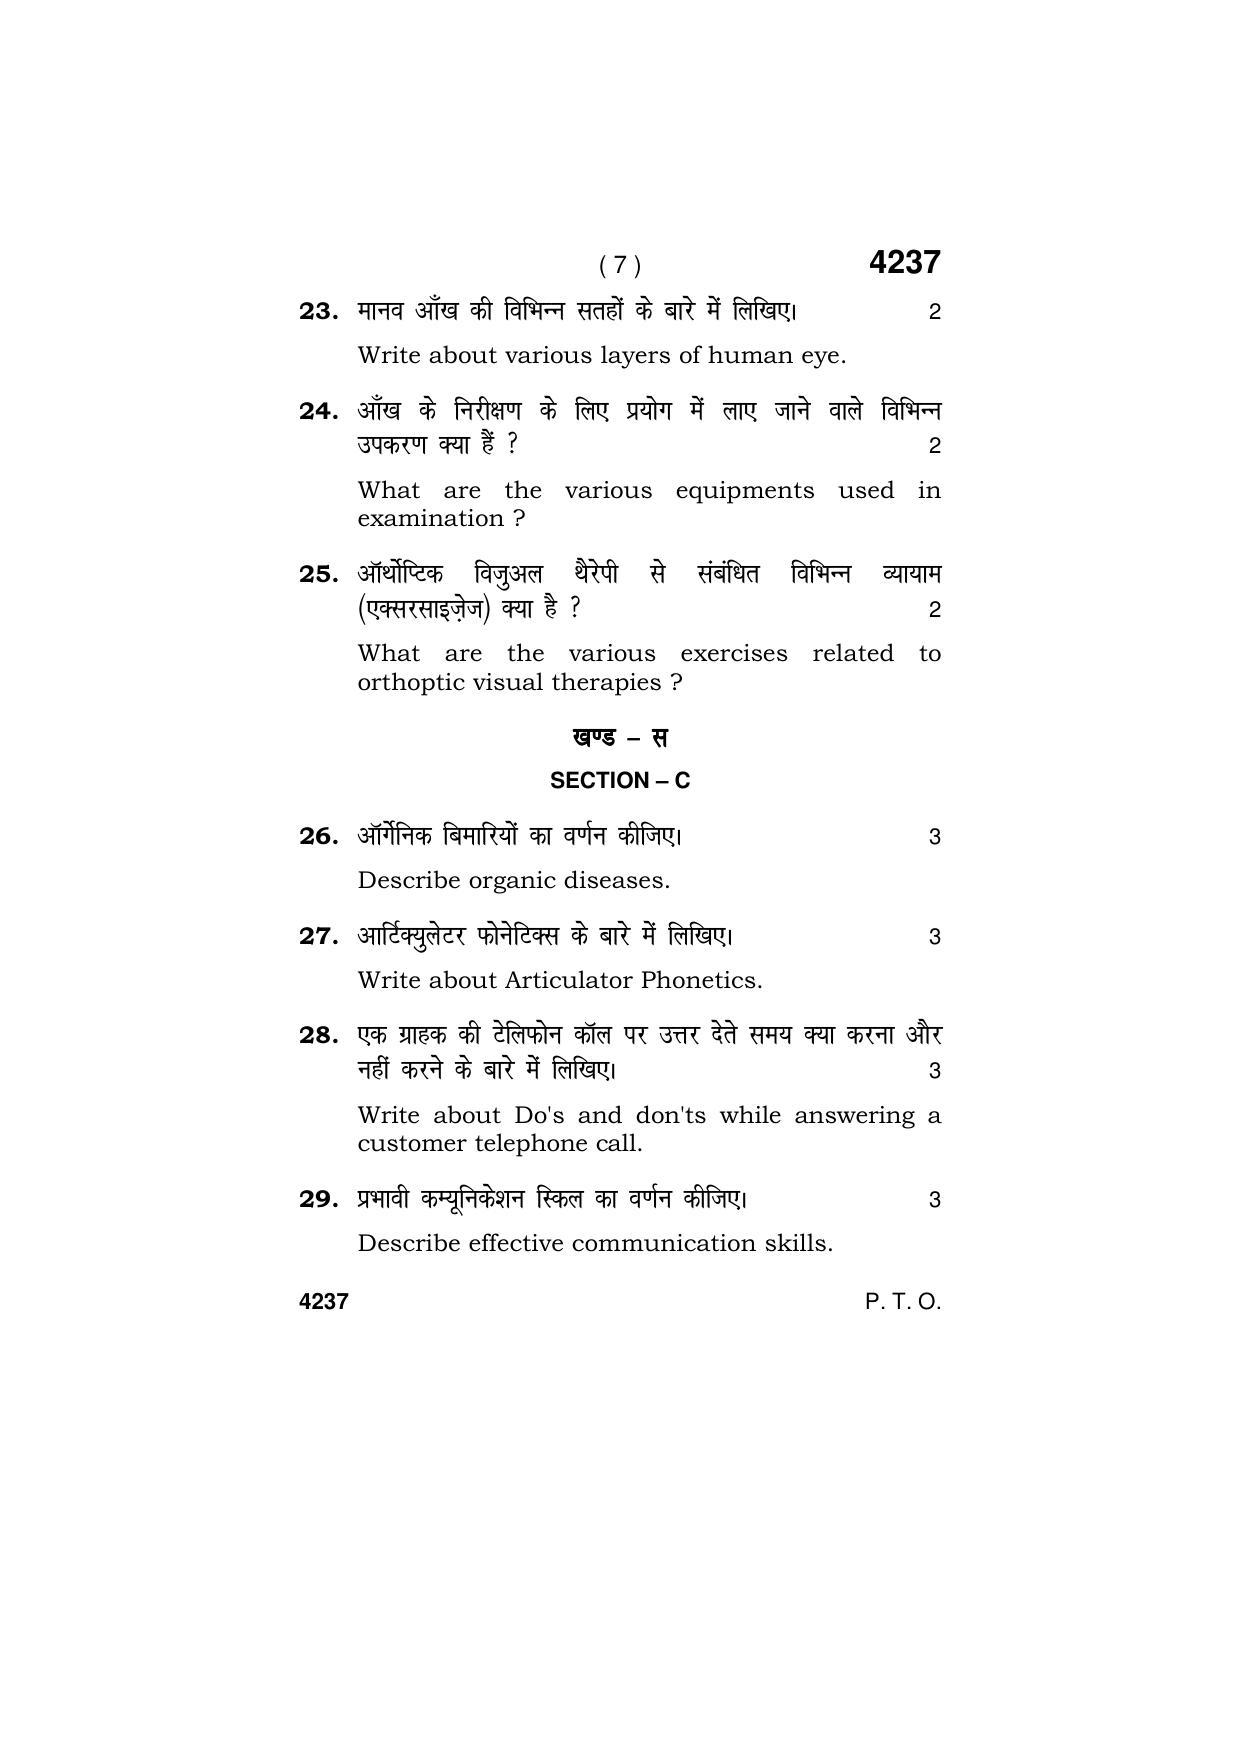 Haryana Board HBSE Class 10 Vision Technician 2019 Question Paper - Page 7